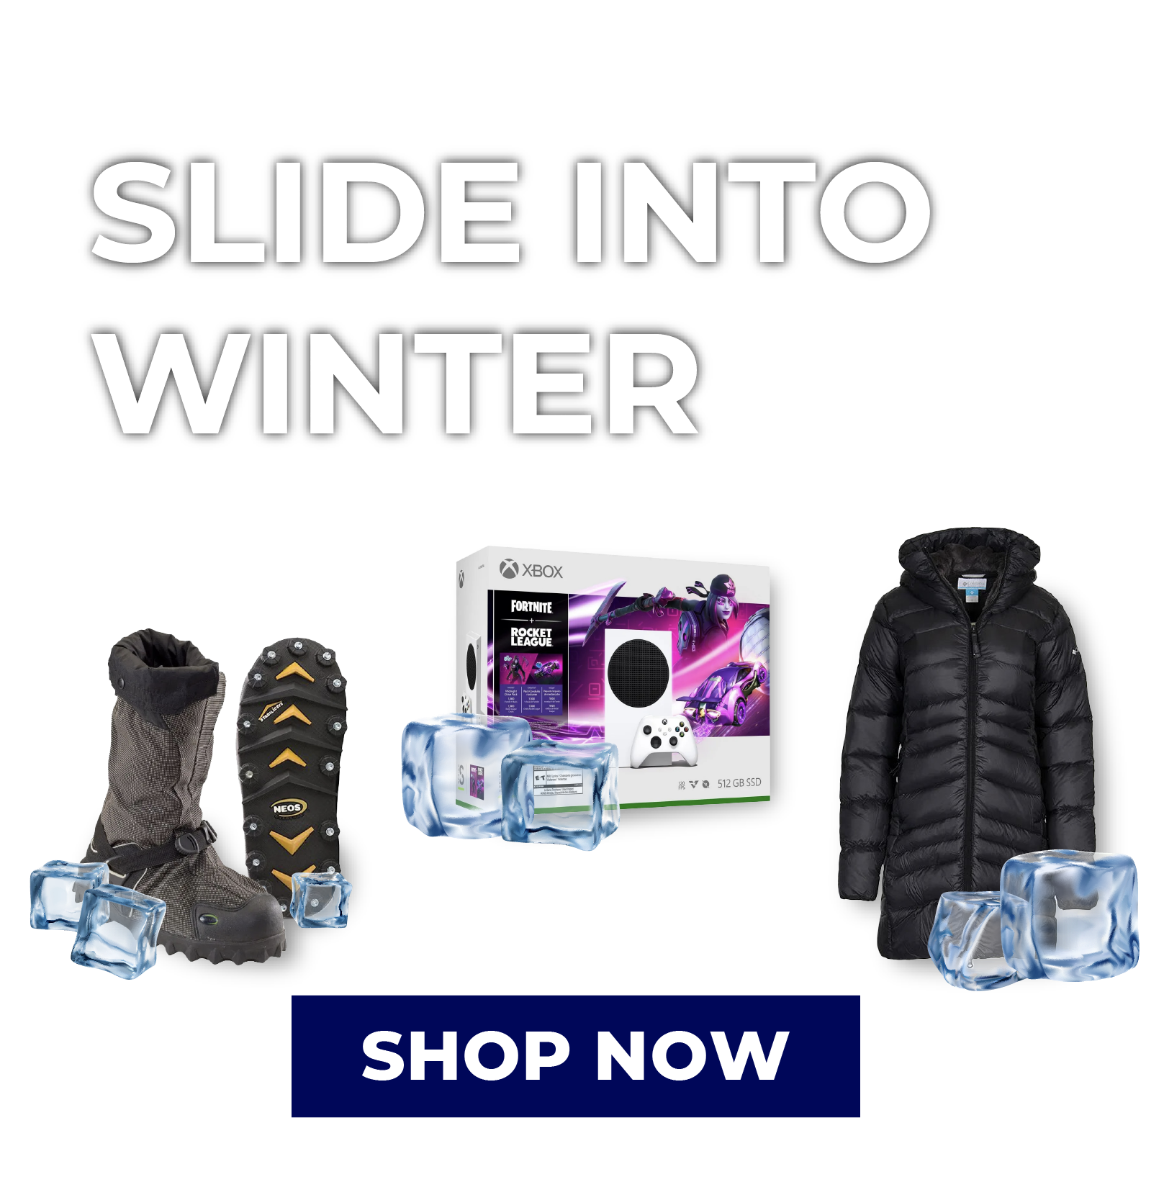 SLIDE INTO WINTER - Our early winter selection. Shop Now